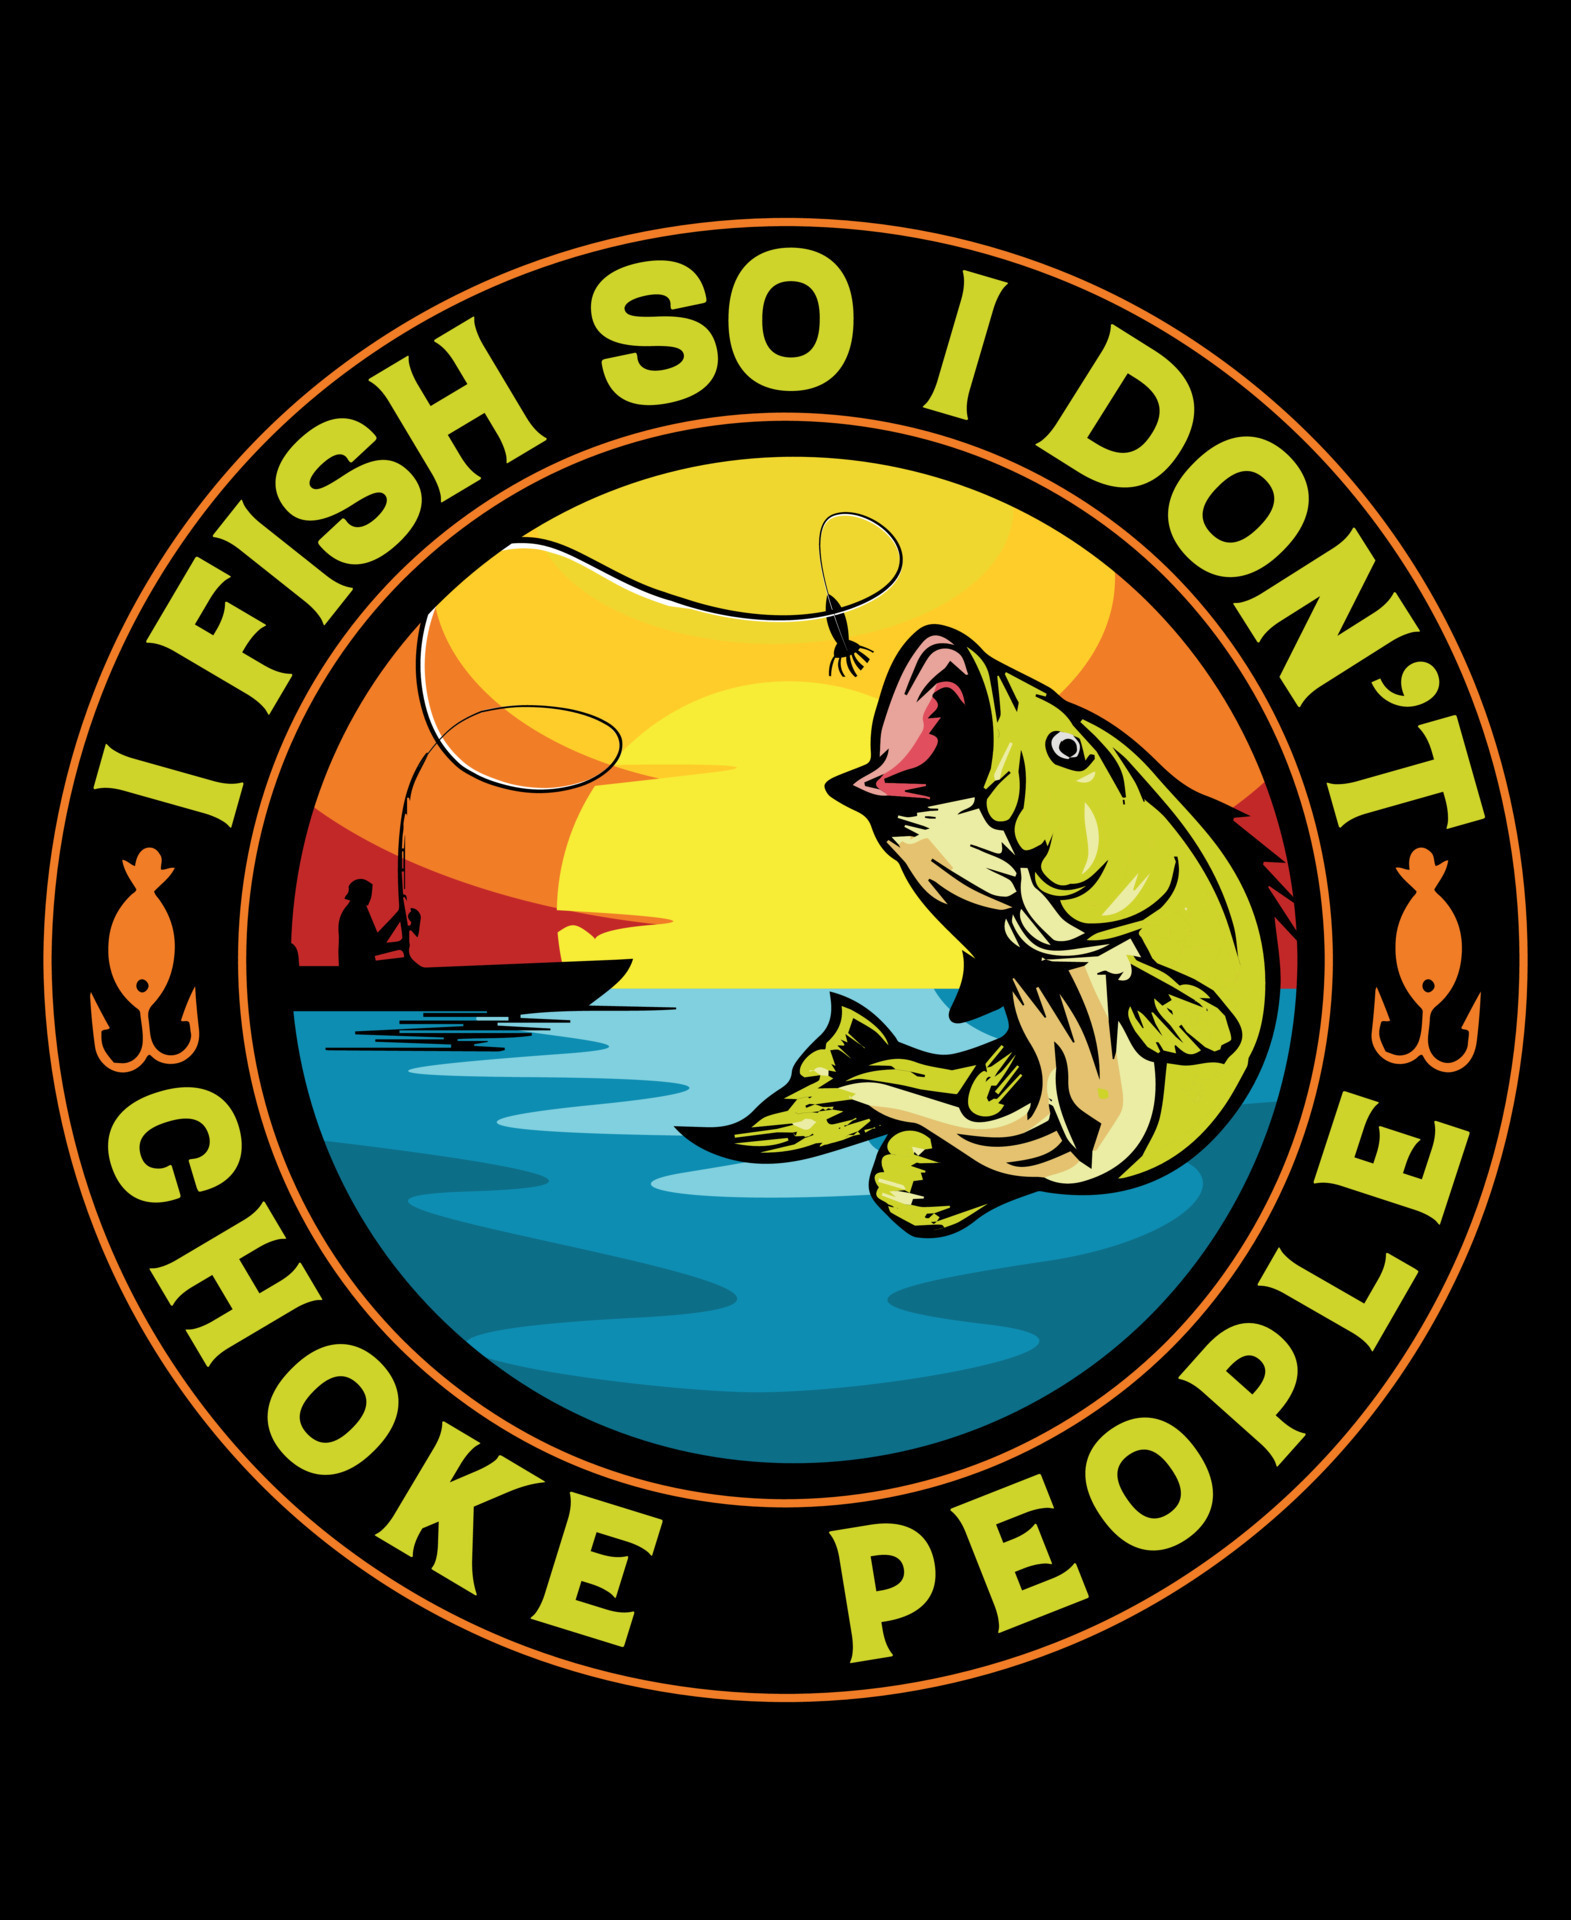 https://static.vecteezy.com/system/resources/previews/012/036/852/original/i-fish-so-i-don-t-choke-people-fishing-t-shirt-design-posters-greeting-cards-textiles-and-sticker-illustration-suitable-for-any-pod-site-vector.jpg